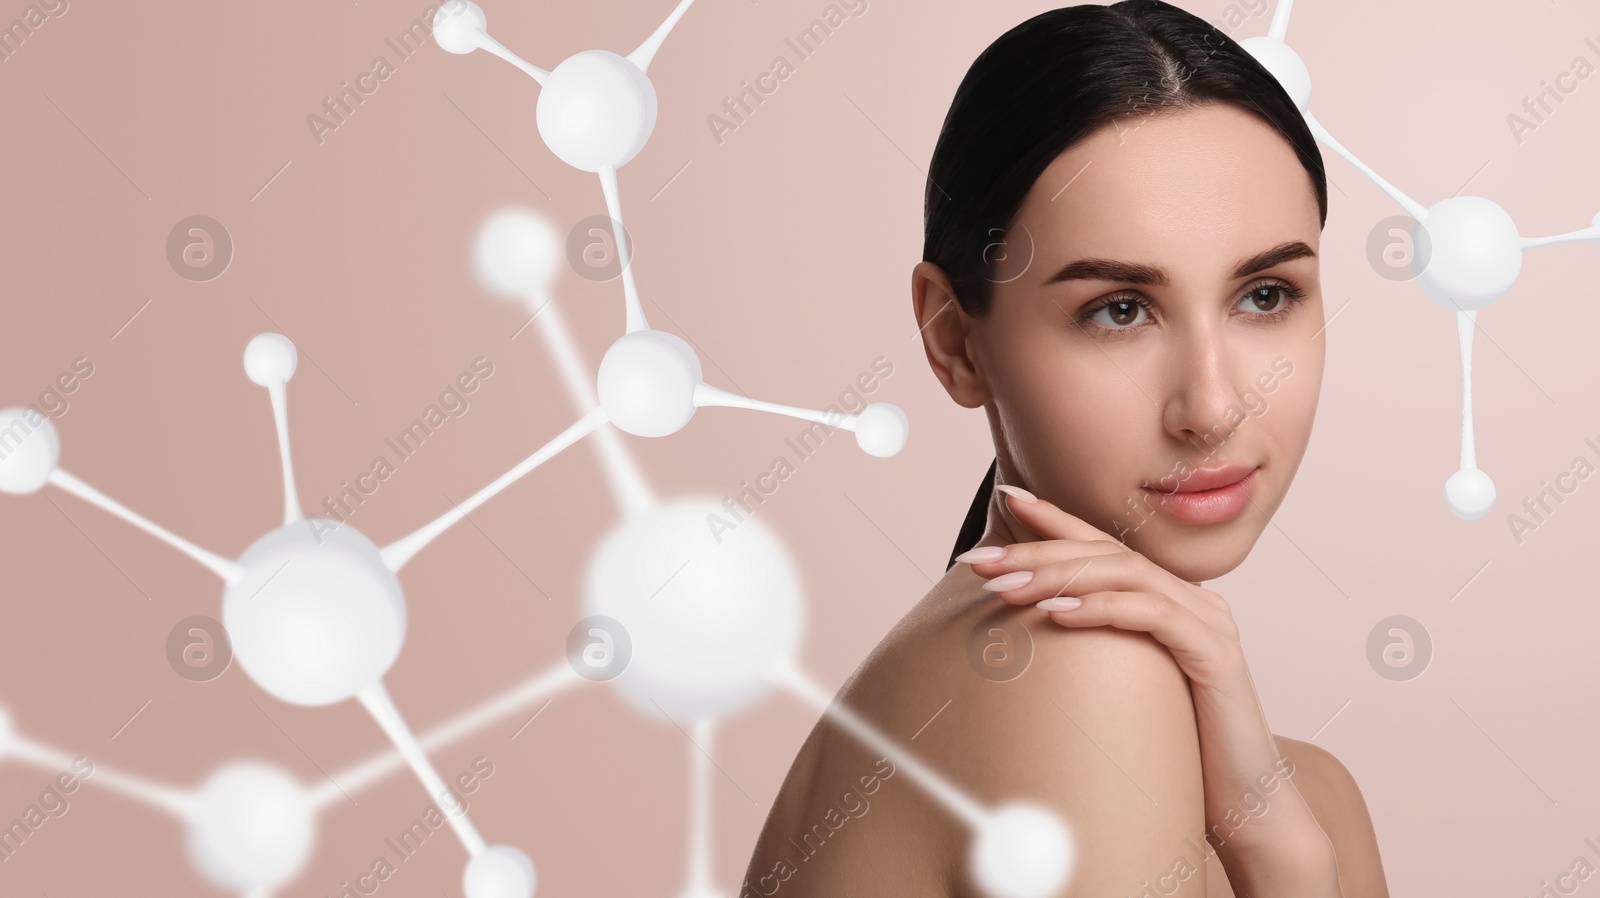 Image of Beautiful woman with perfect healthy skin and molecular model on dusty pink background, banner design. Innovative cosmetology